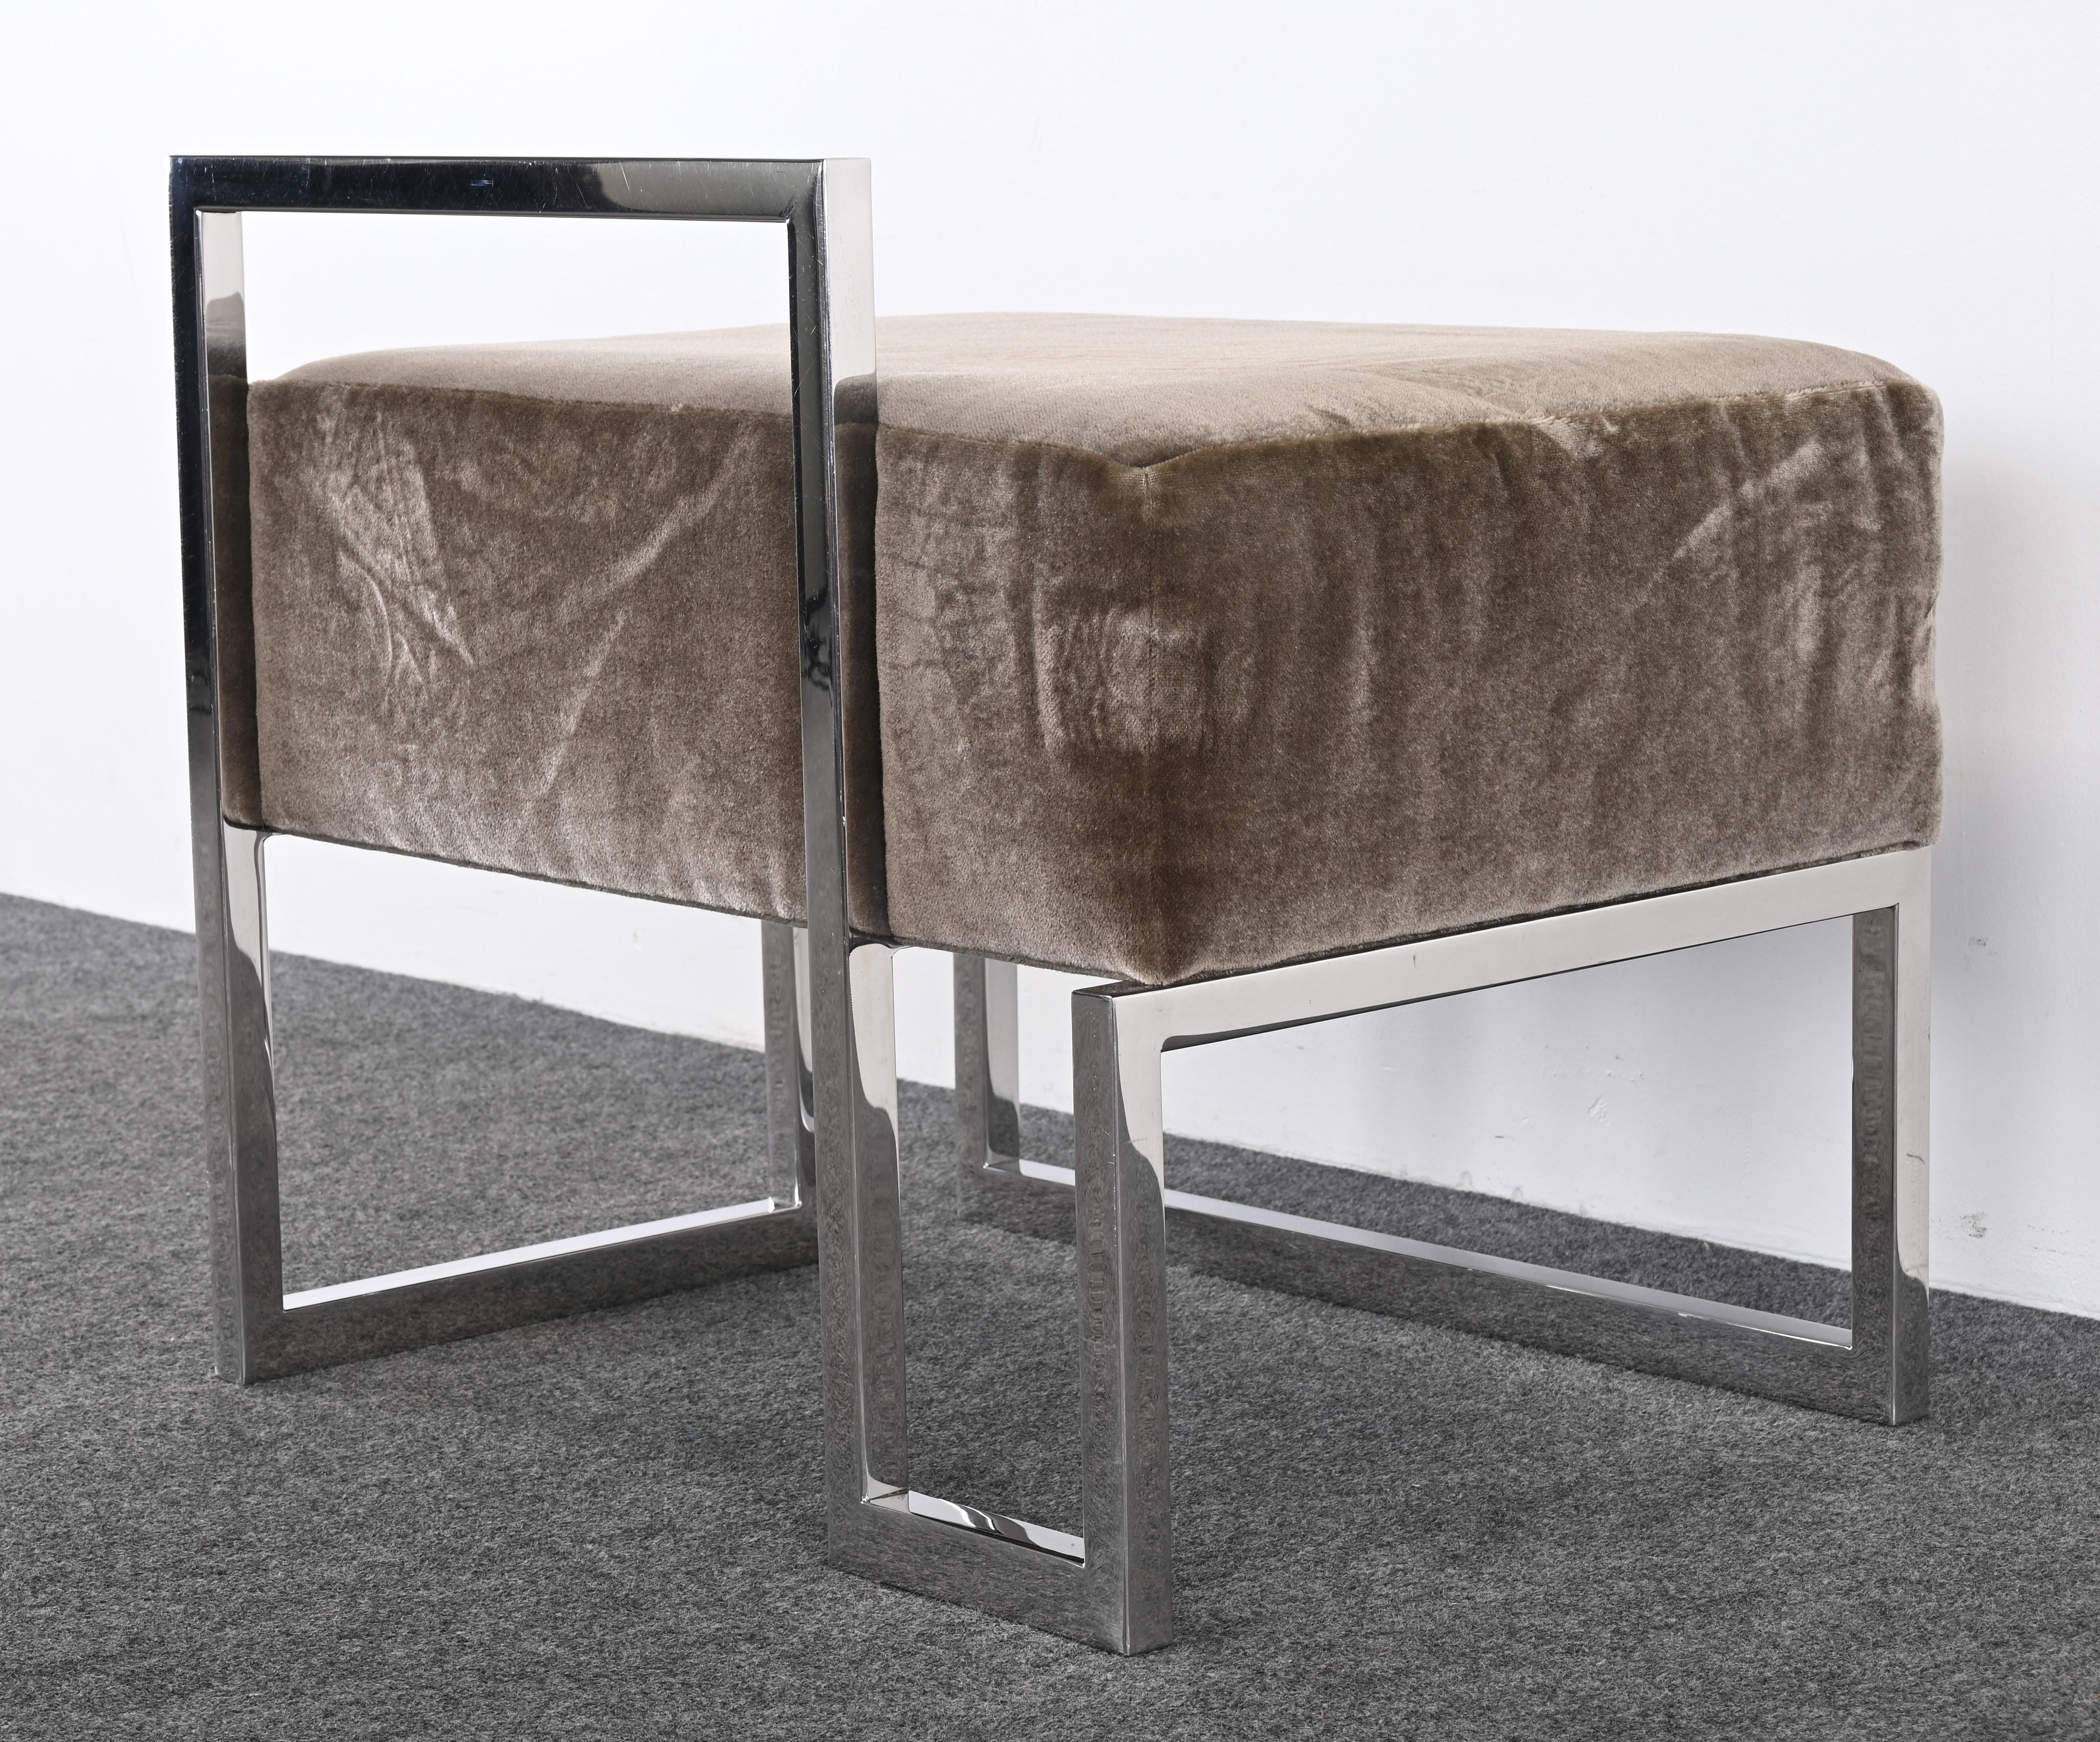 Stainless Steel Bench by Vladimir Kagan for Gucci, 1990s For Sale 3